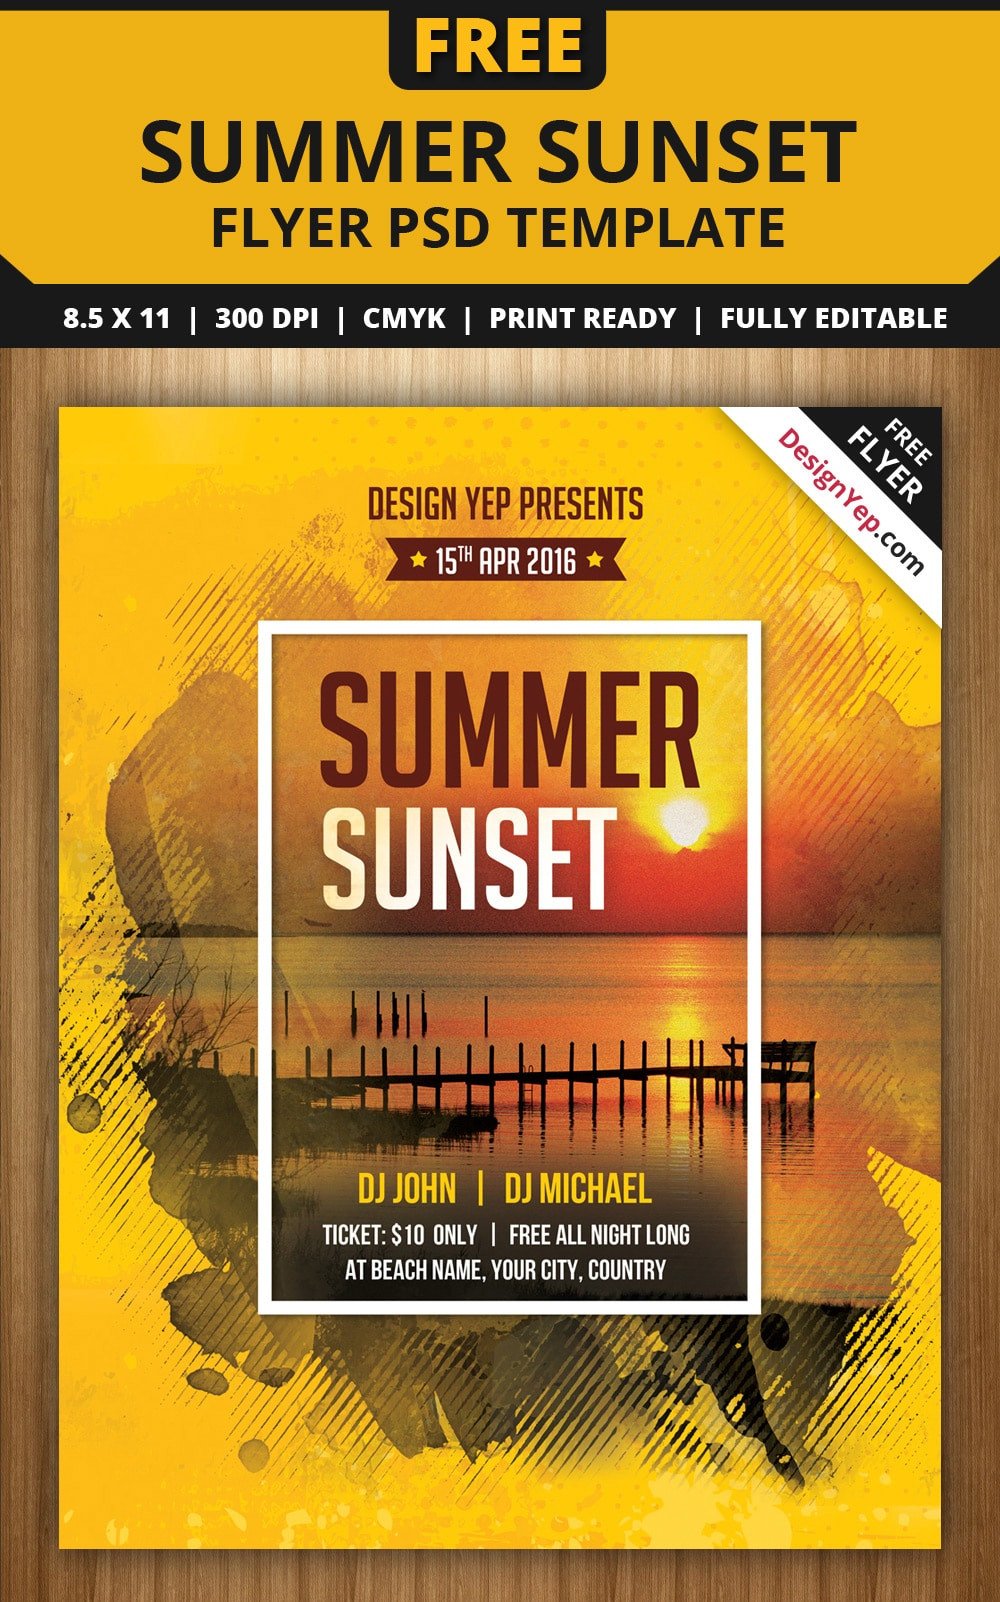 Free Flyer Templates PSD From 2016 CSS Author